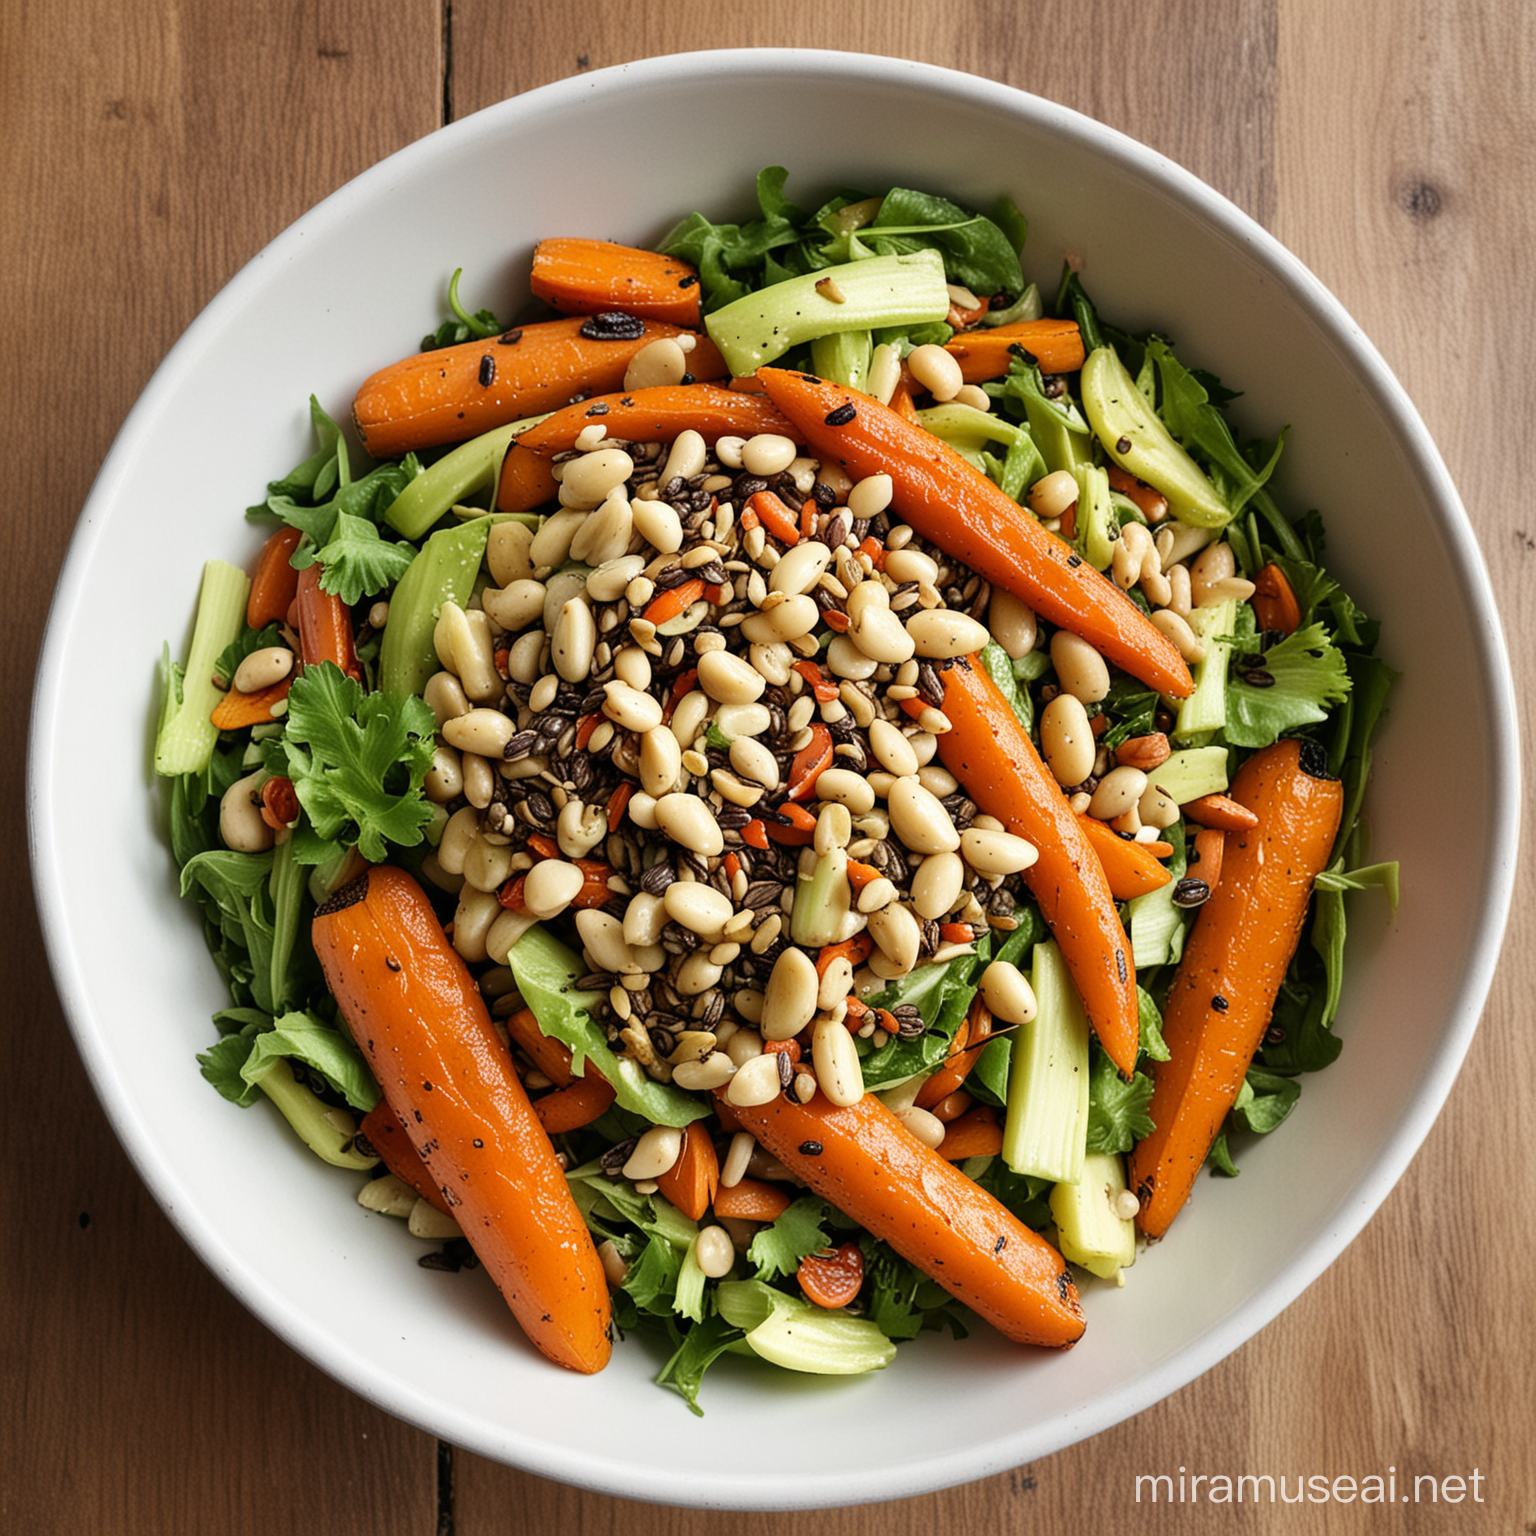 butterbean salad, roasted carrots, celery, toping toasted
seeds